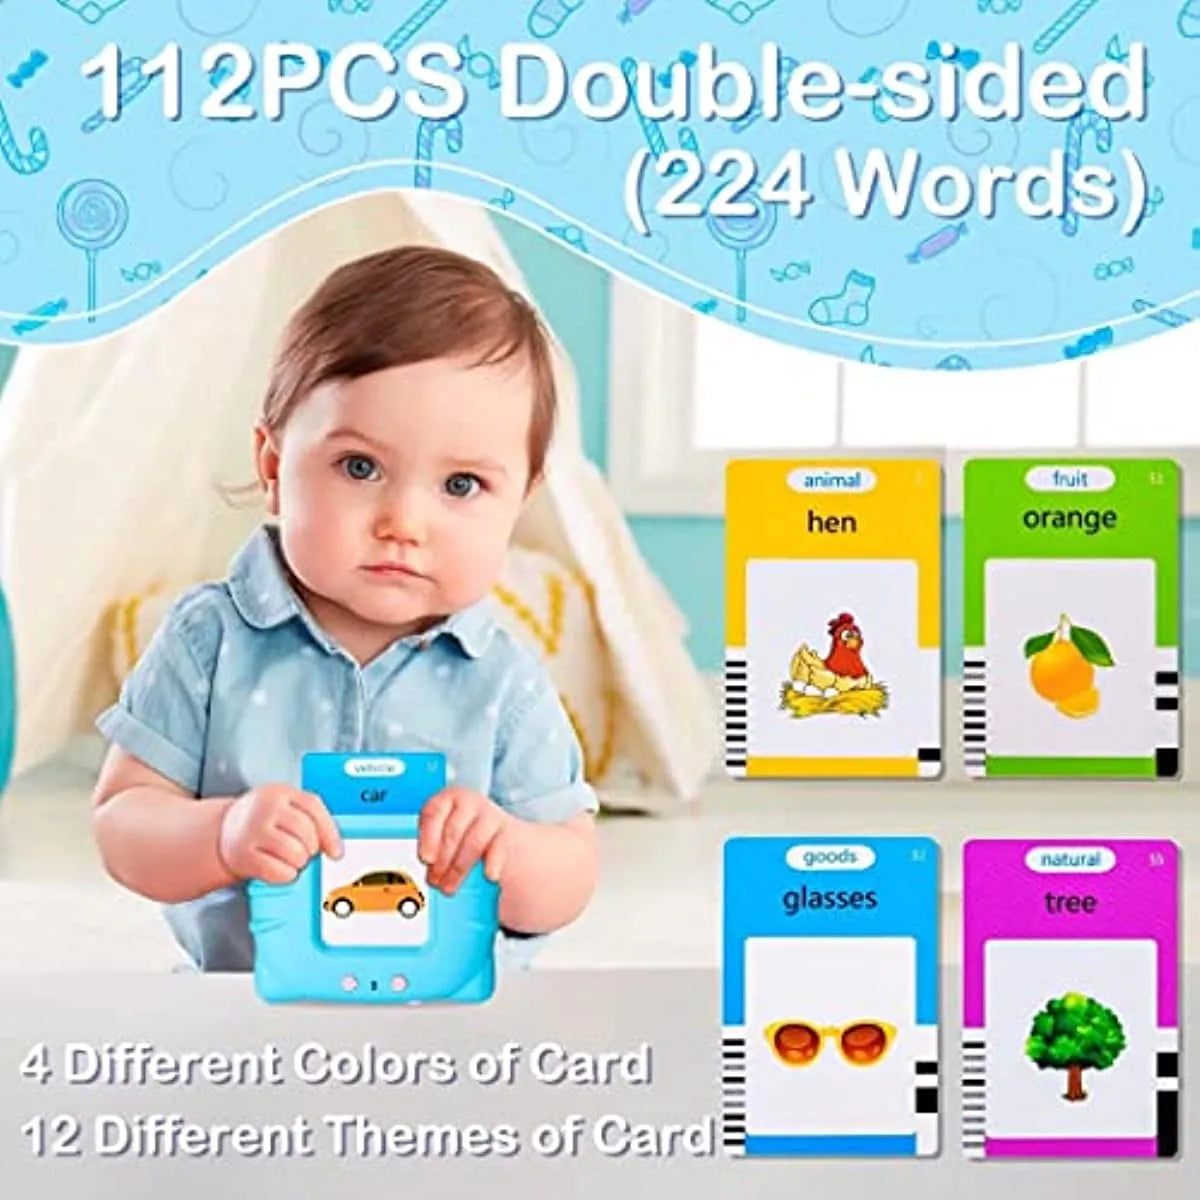 Talking Flash Cards Educational Learning Machine for Kids: Interactive & Portable Toy for Preschoolers  petlums.com   